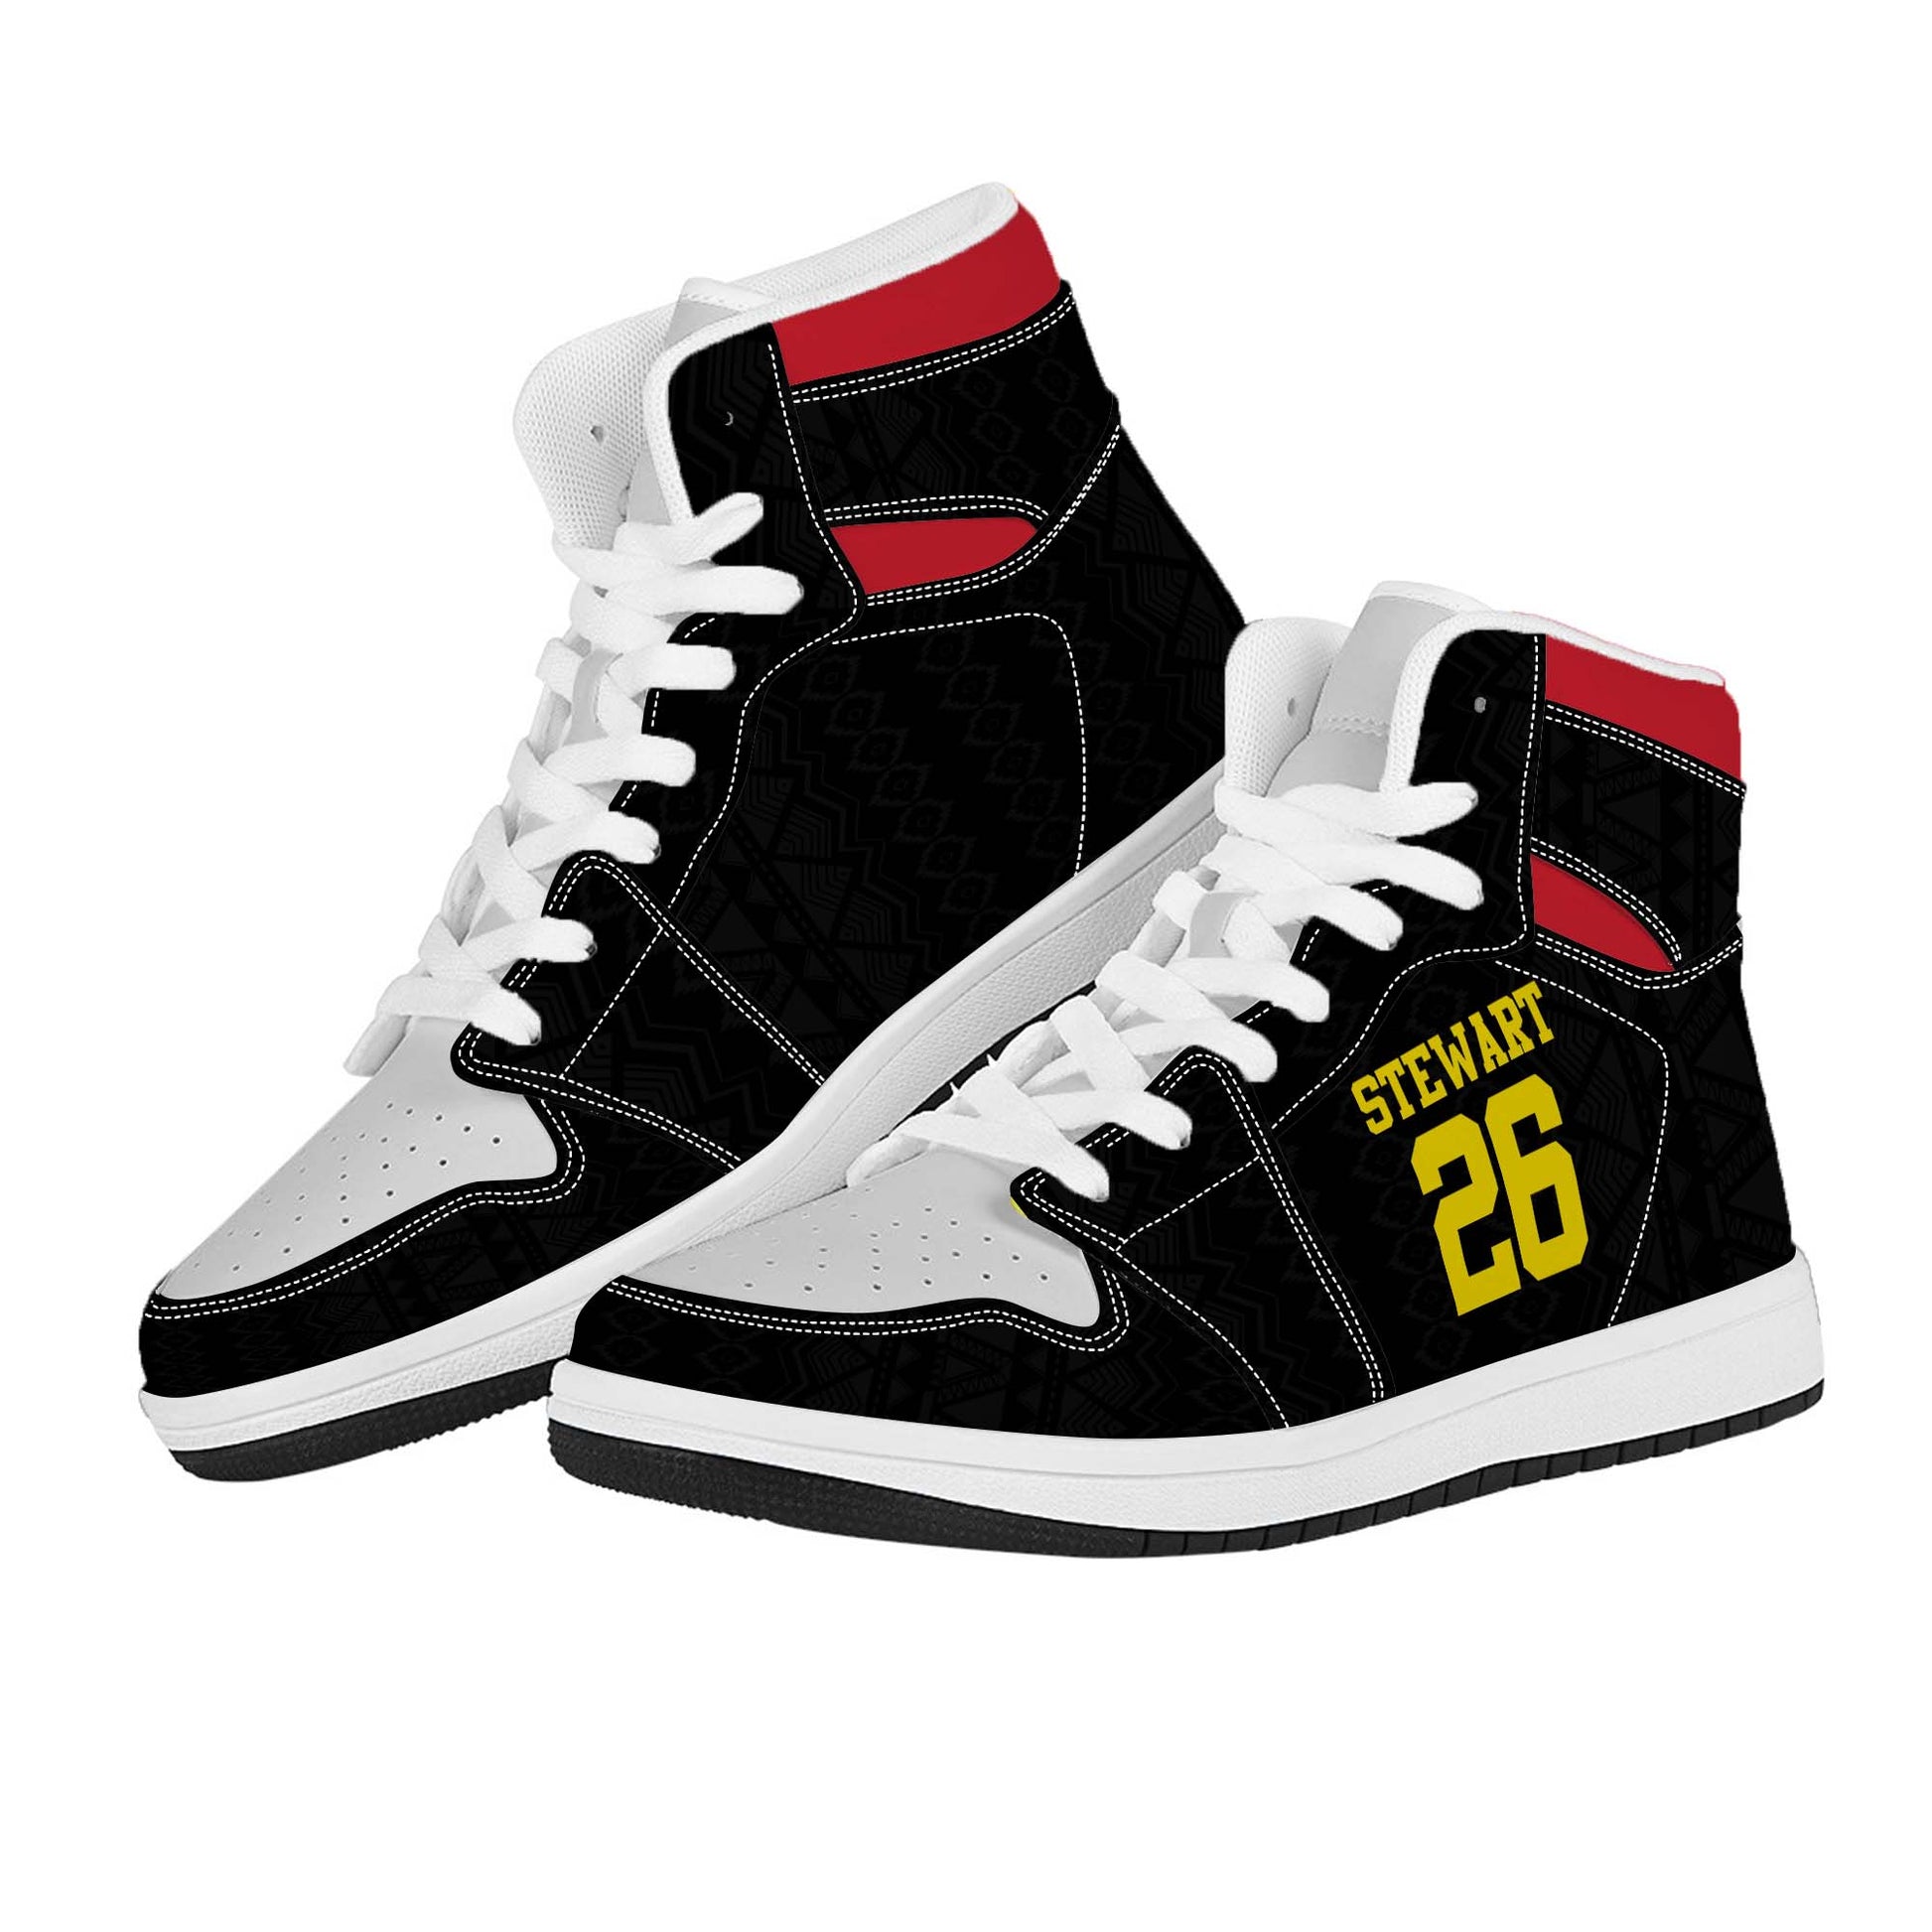 Personalized African Soul High Top Sneakers High Top Sneakers Tianci 